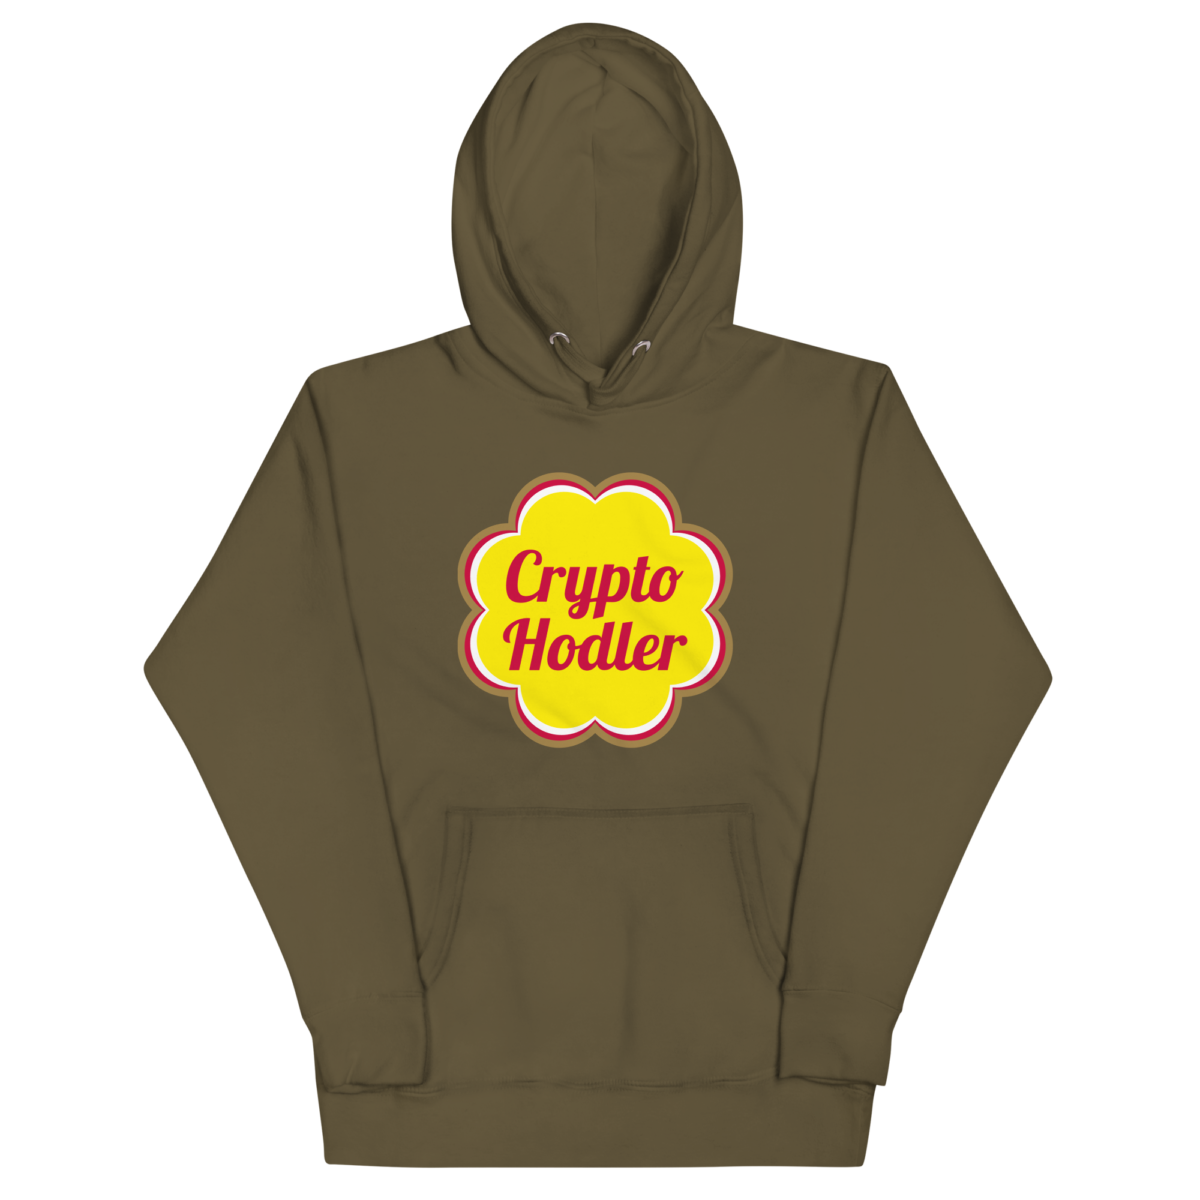 unisex premium hoodie military green front 6357a8b7f35e4 - Crypto Hodler Hoodie